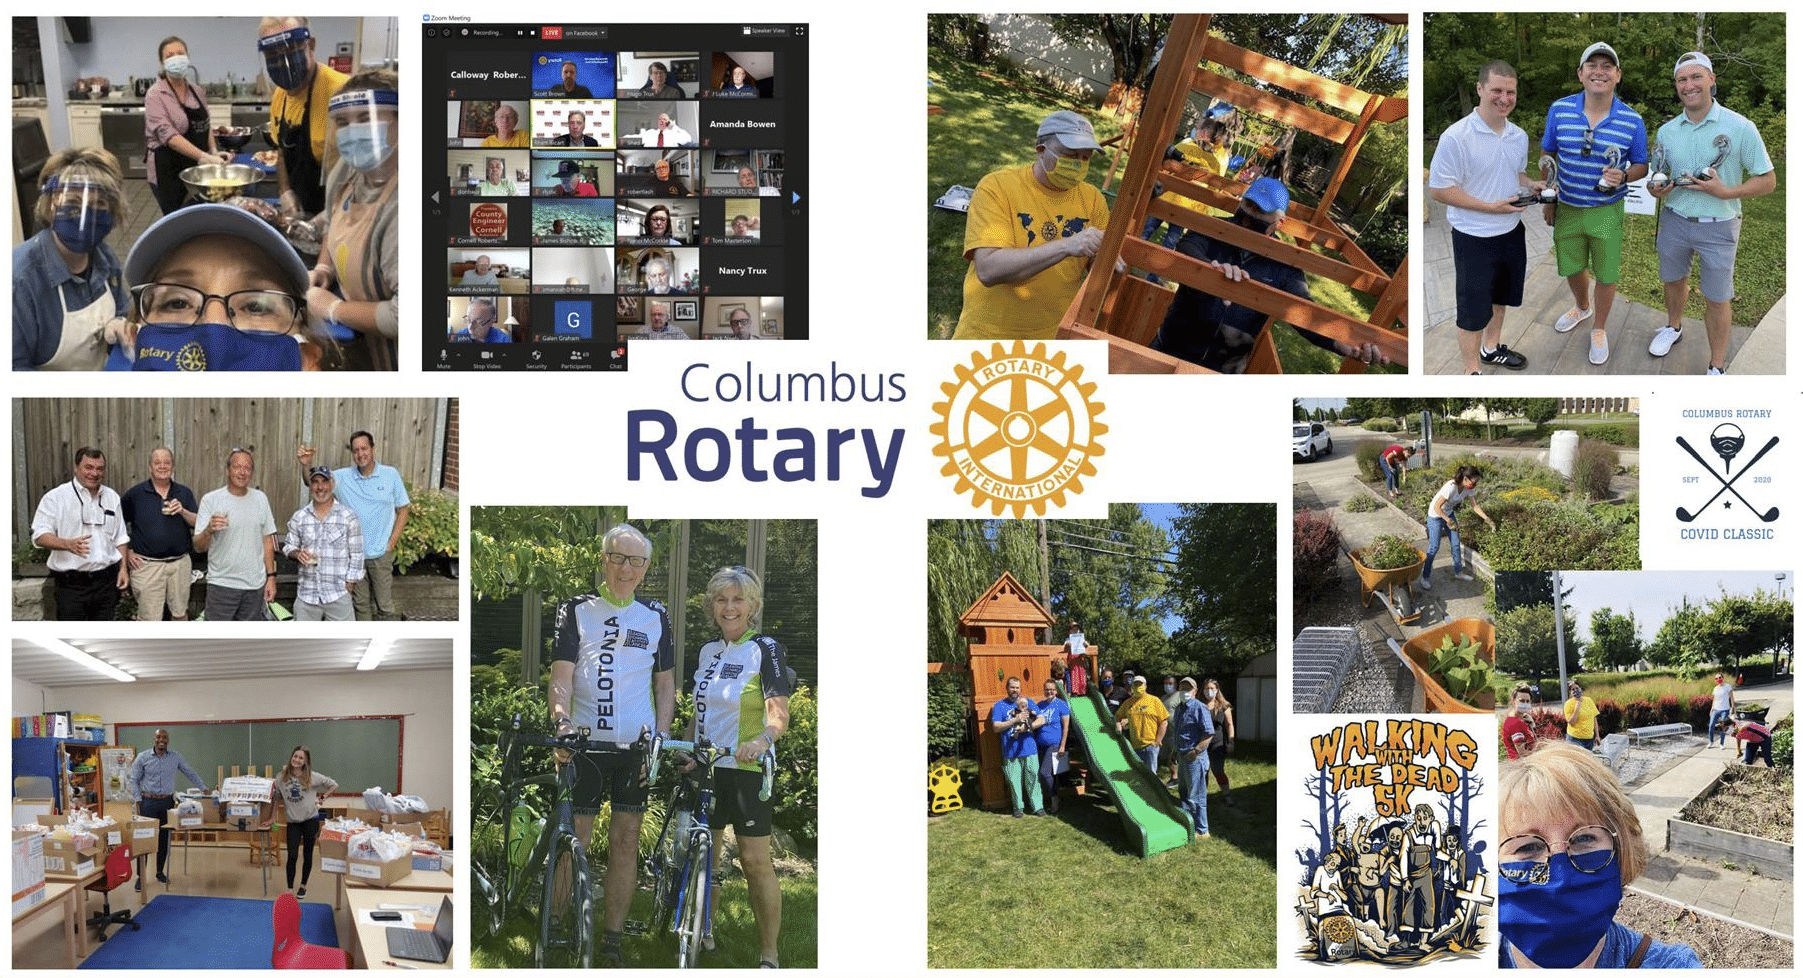 multi images of the Columbus Rotary clubs activities